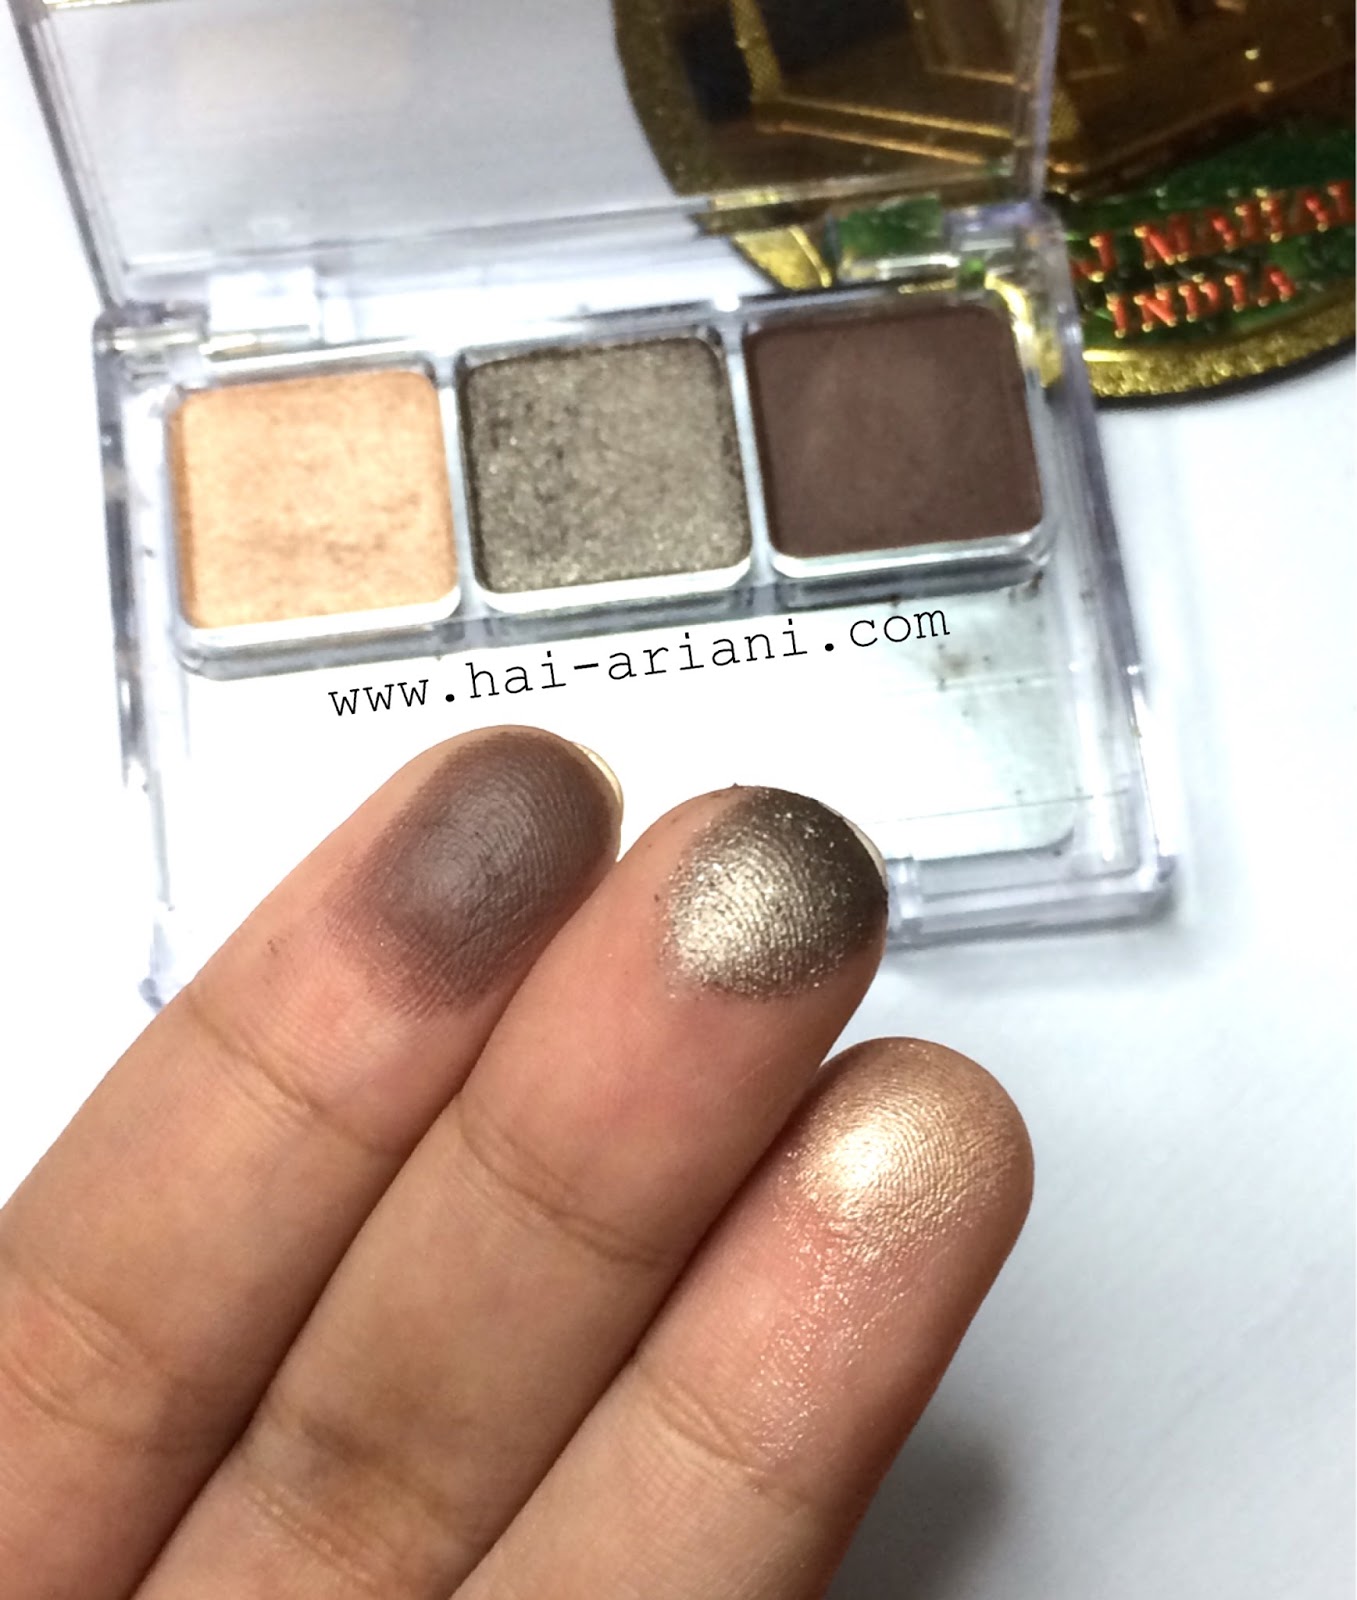 WARDAH NUDE COLOURS EYESHADOW PASSIONATE REVIEW